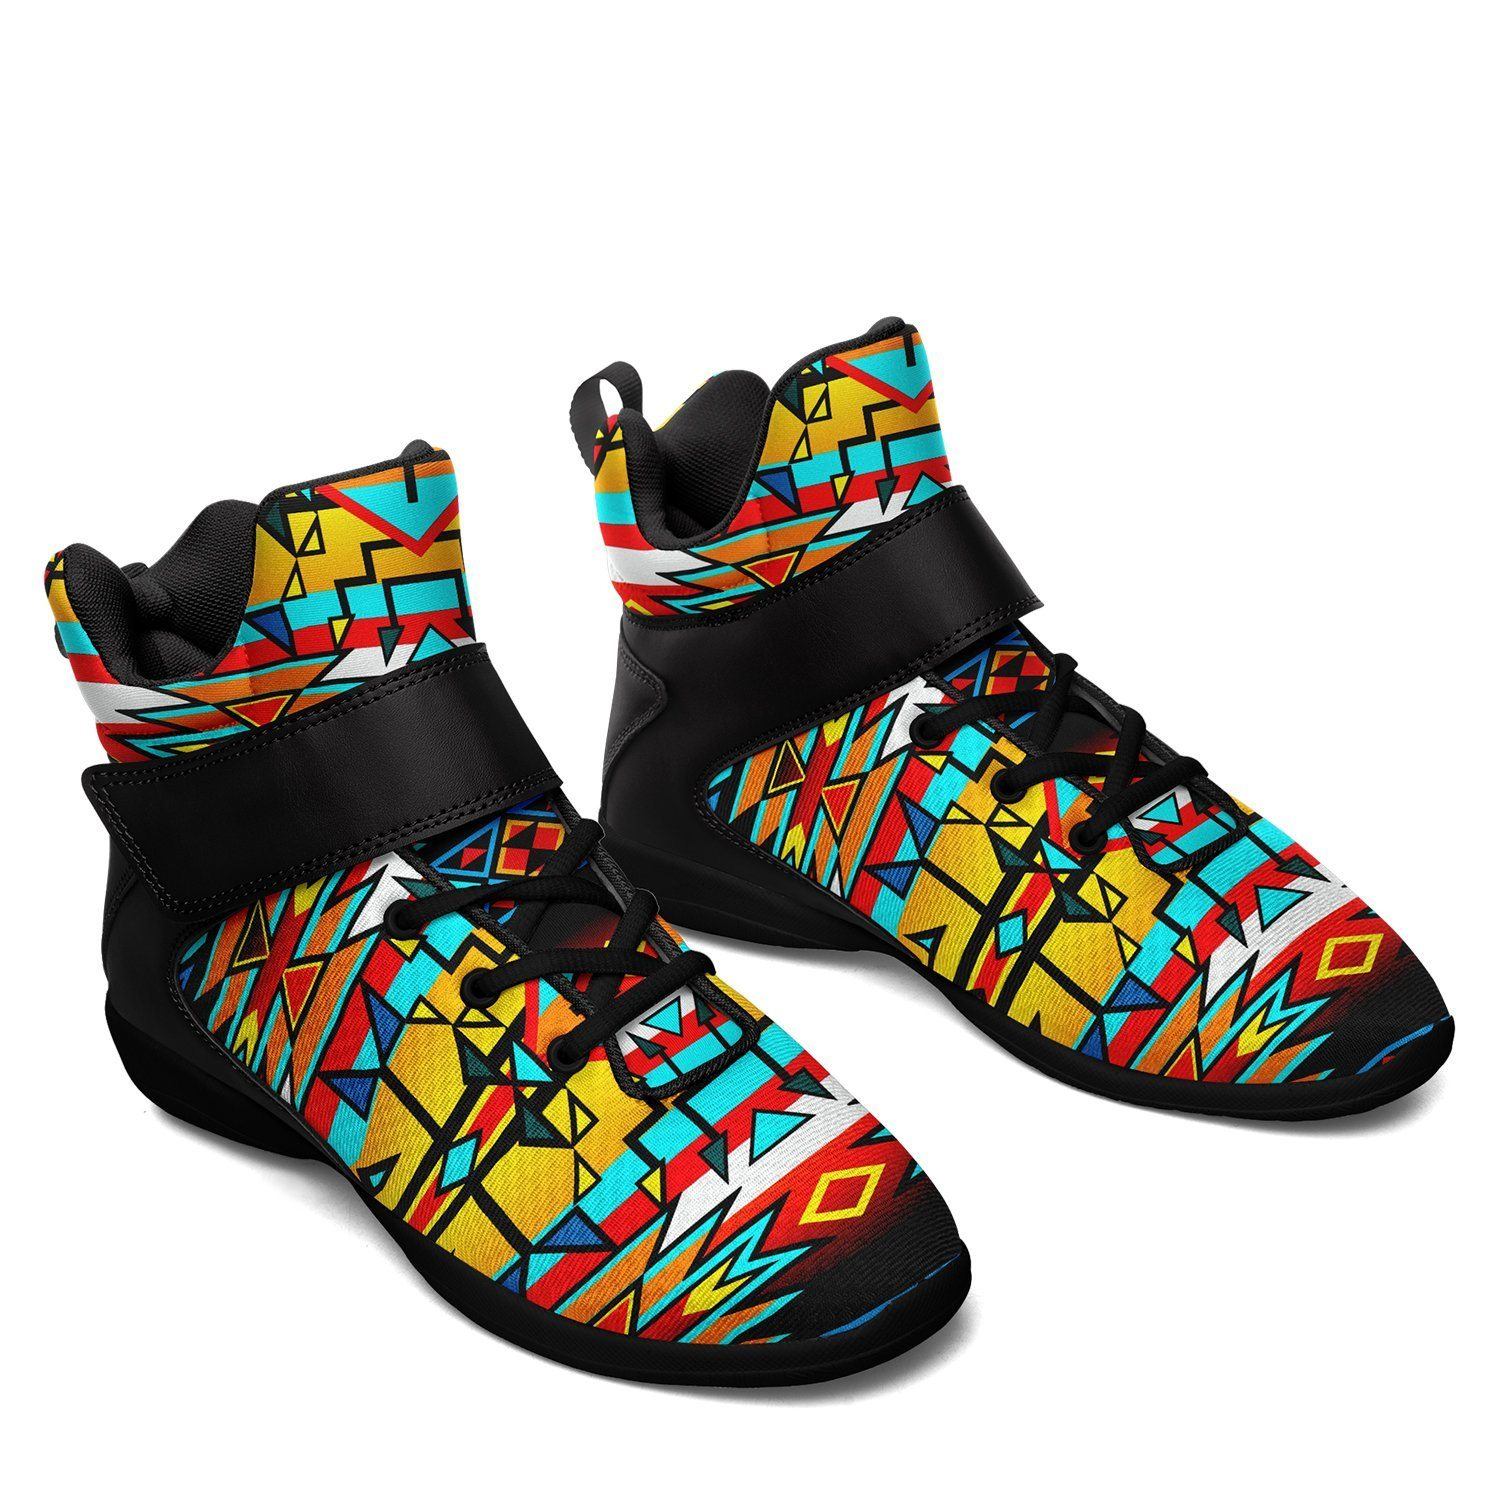 Force of Nature Twister Ipottaa Basketball / Sport High Top Shoes - Black Sole 49 Dzine 